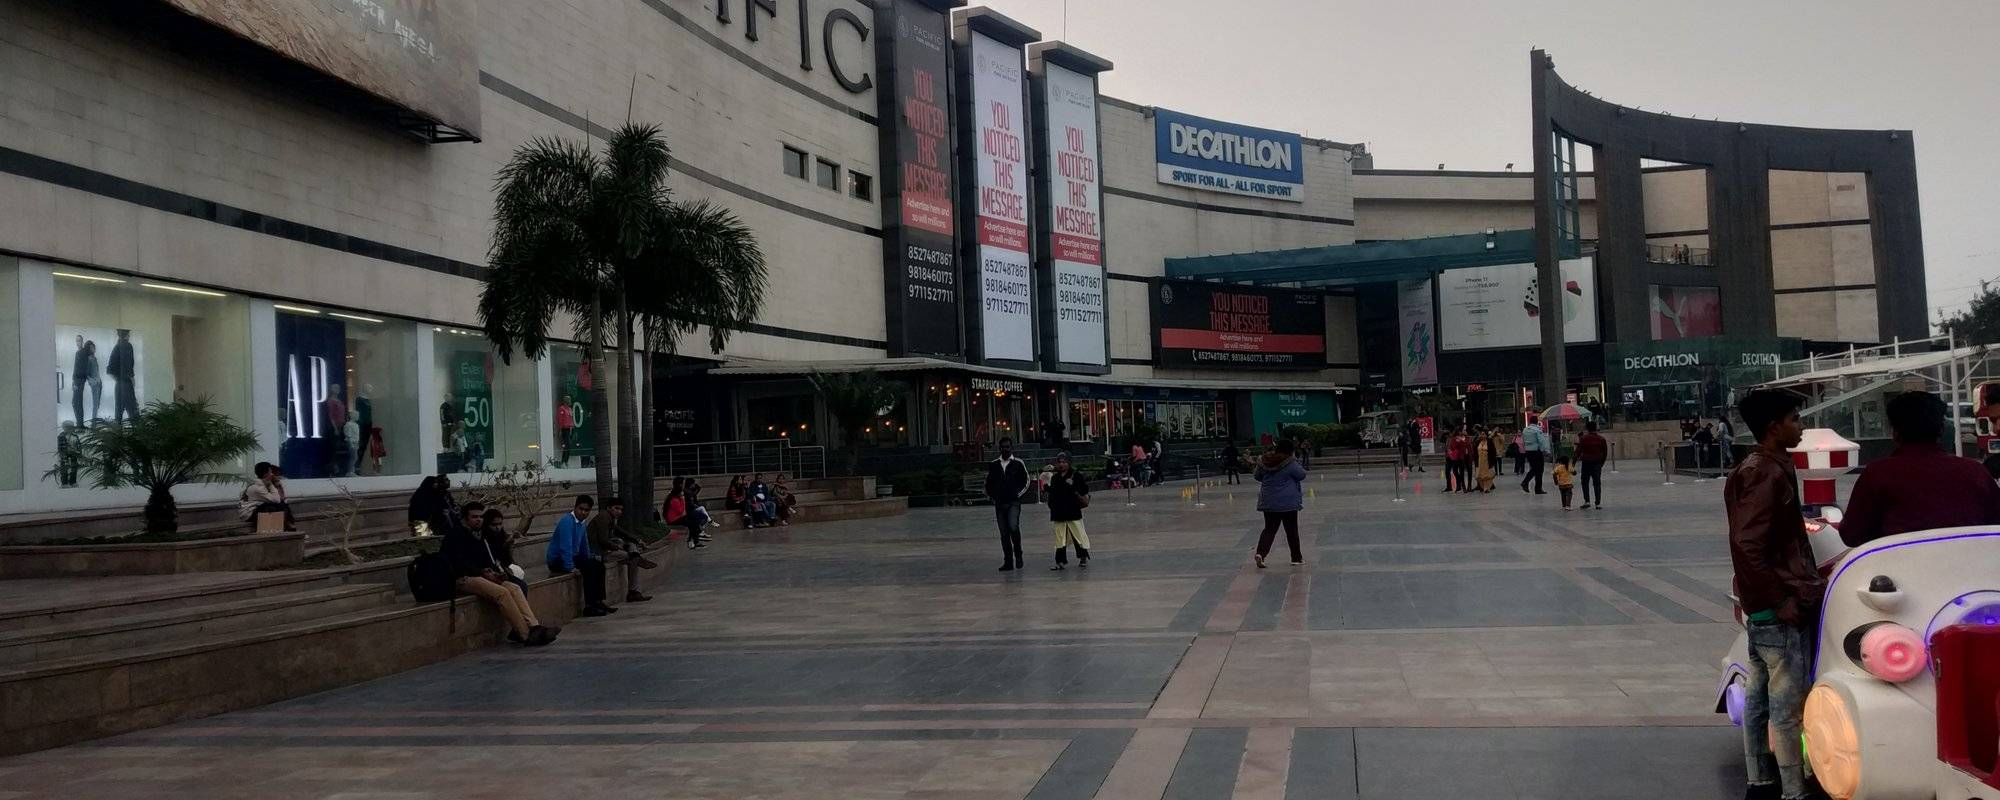 A Visit to Pacific Mall - Tagore Garden